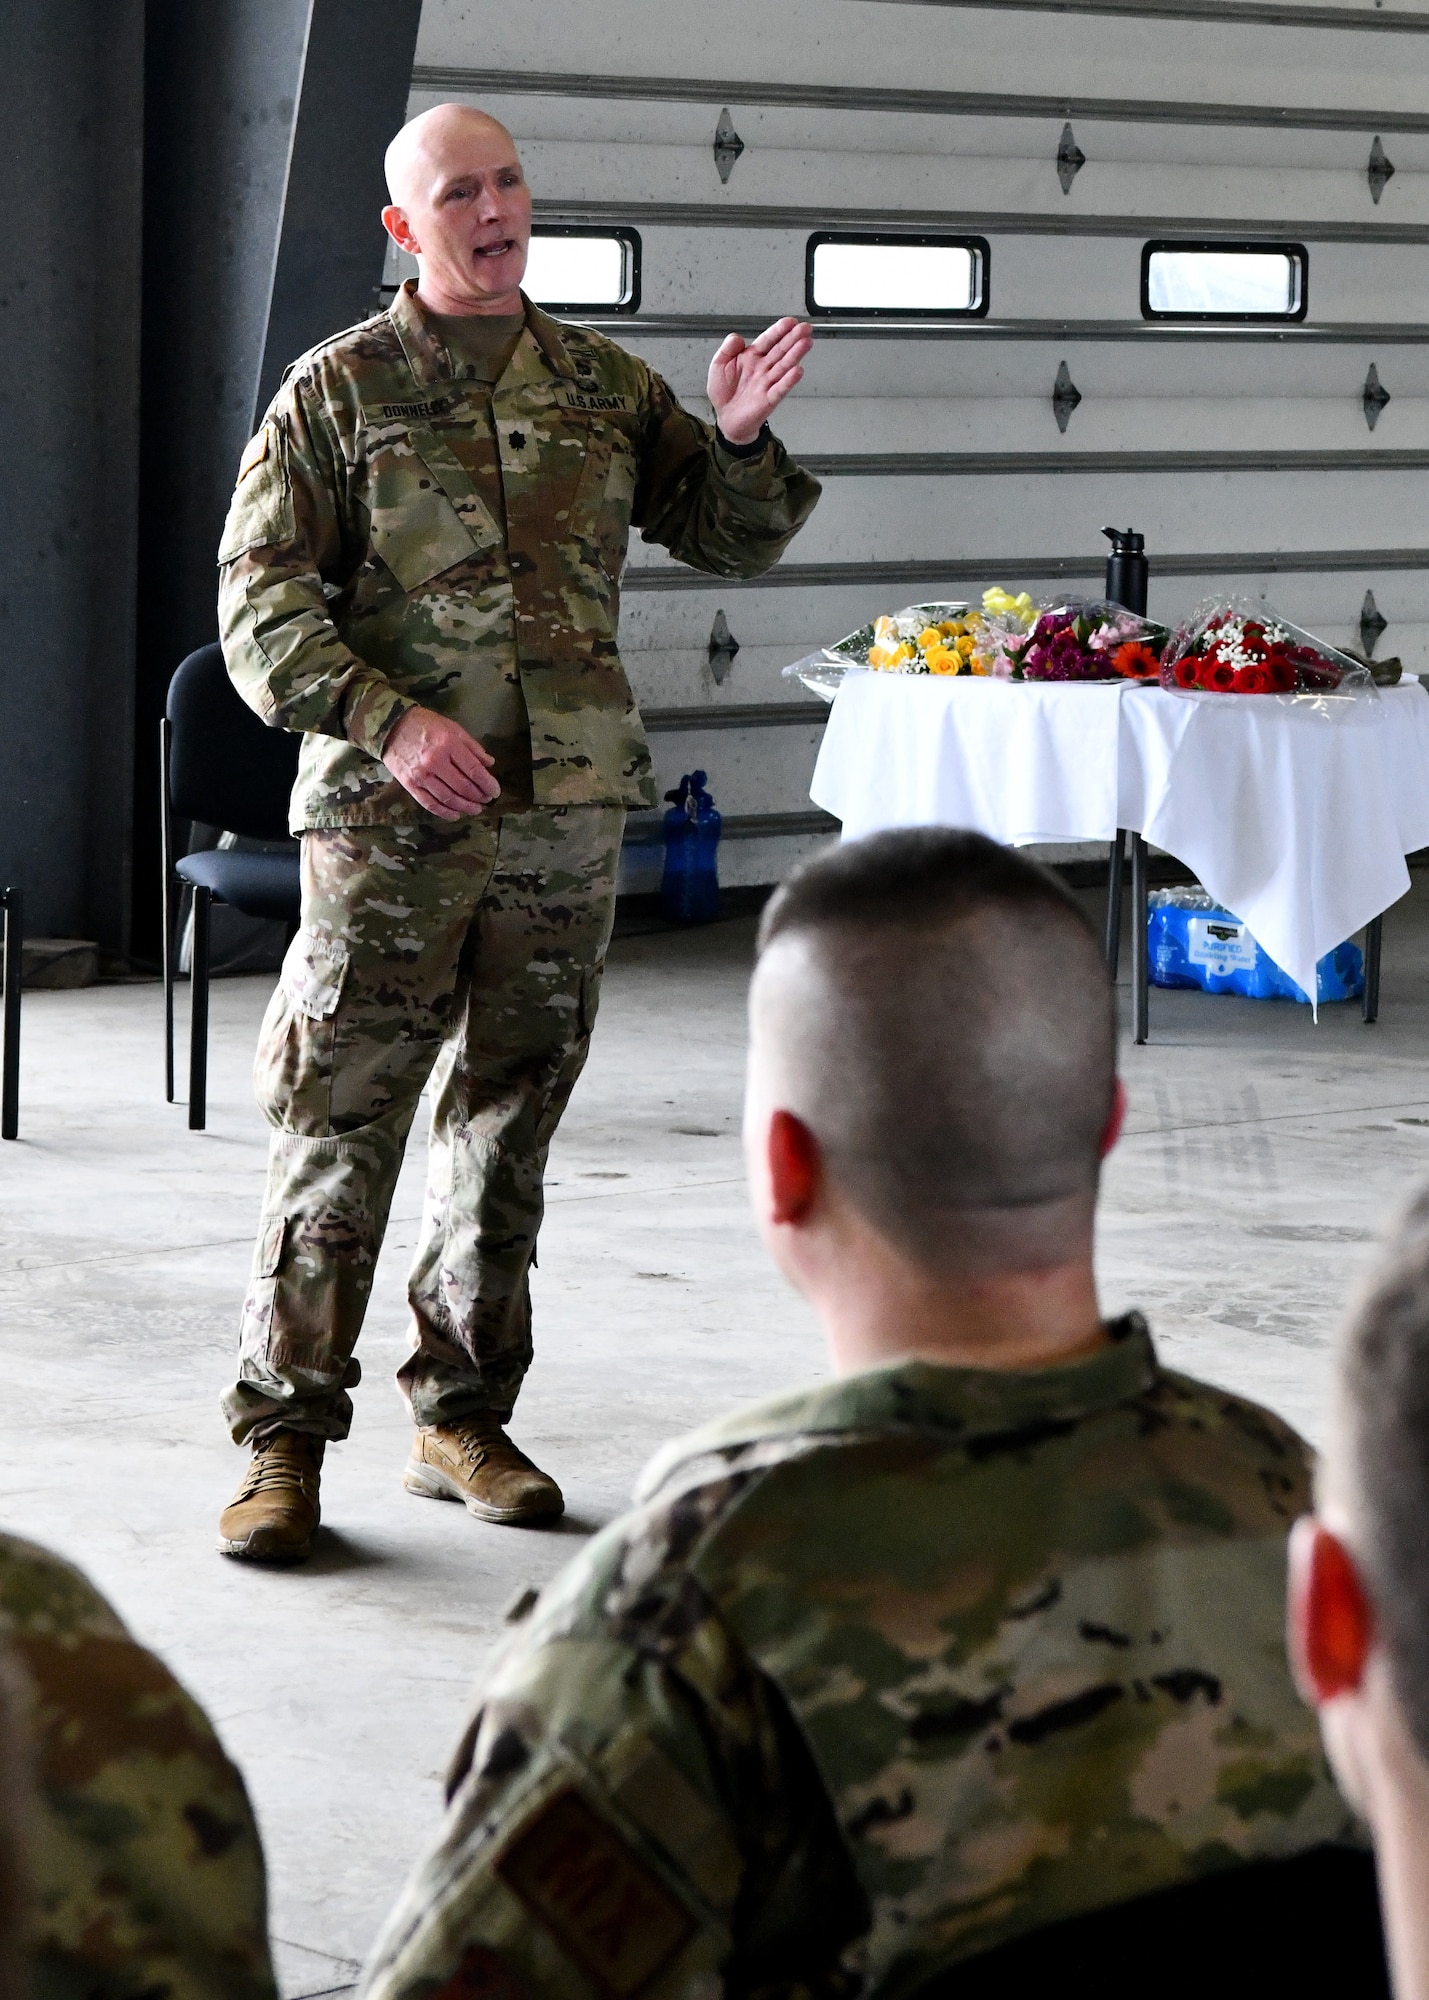 U.S. Army Lt. Col. Patrick Donnelly, Task Force Powderhorn senior leader, addresses Airmen during the TF Powderhorn awards ceremony at Barnes Air National Guard Base, Massachusetts, May 14, 2022. Fifty four Barnestormers were awarded Army Achievement Medals for their outstanding performance during TF Powderhorn, an activation where members supported state medical facilities. (U.S. Air National Guard Photo by Senior Airman Camille Lienau)